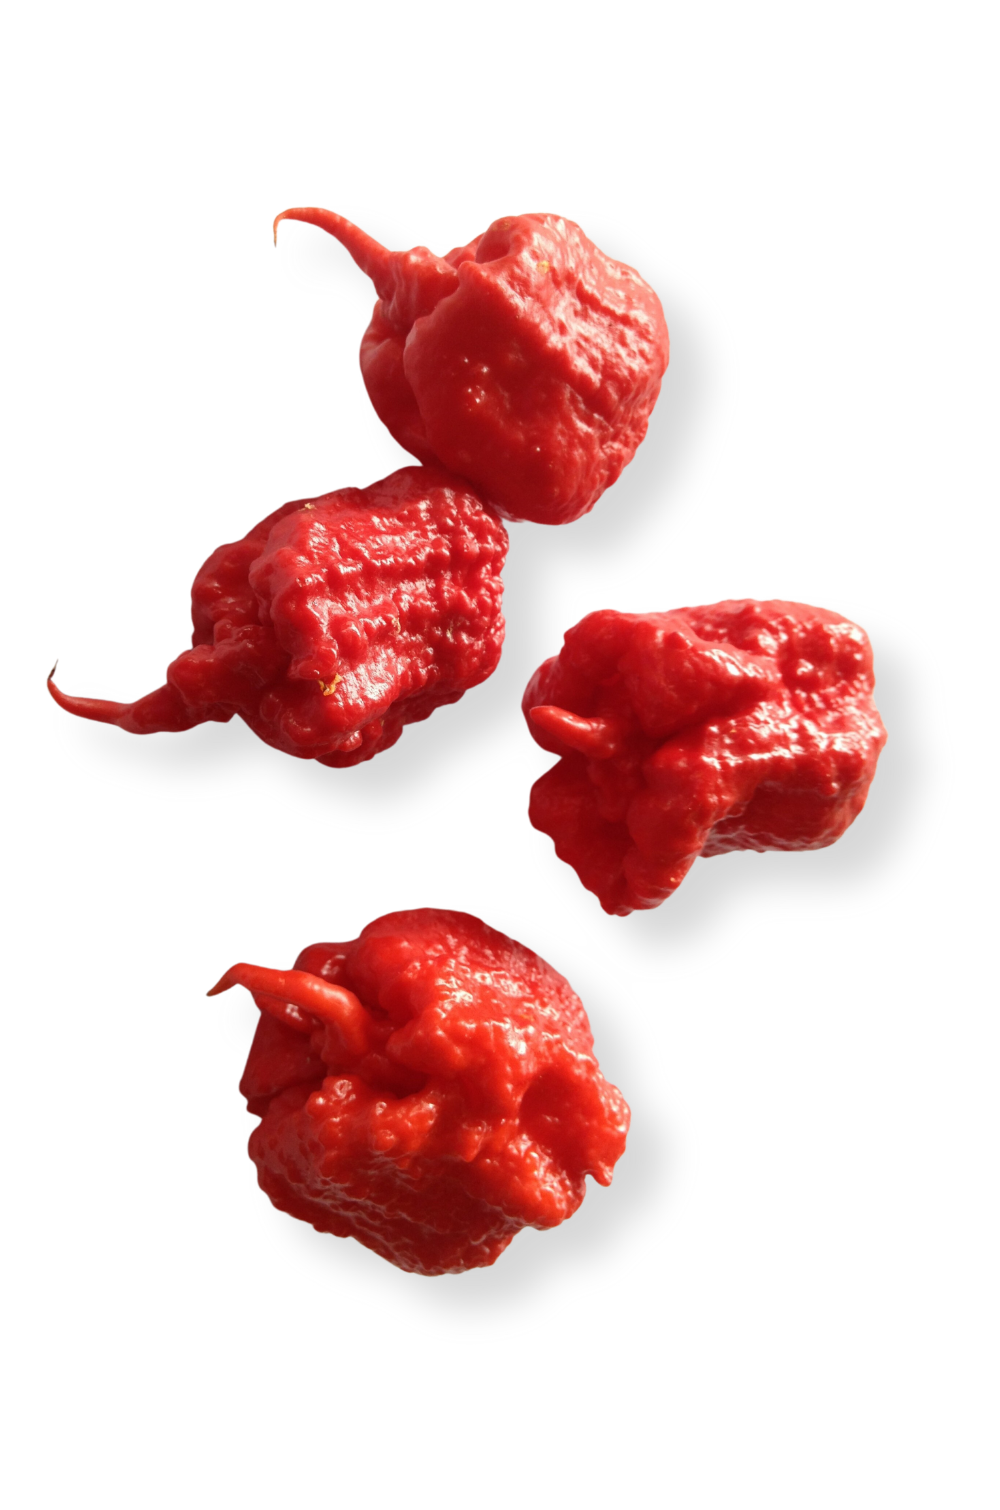 How to survive eating a Carolina Reaper, the world's hottest